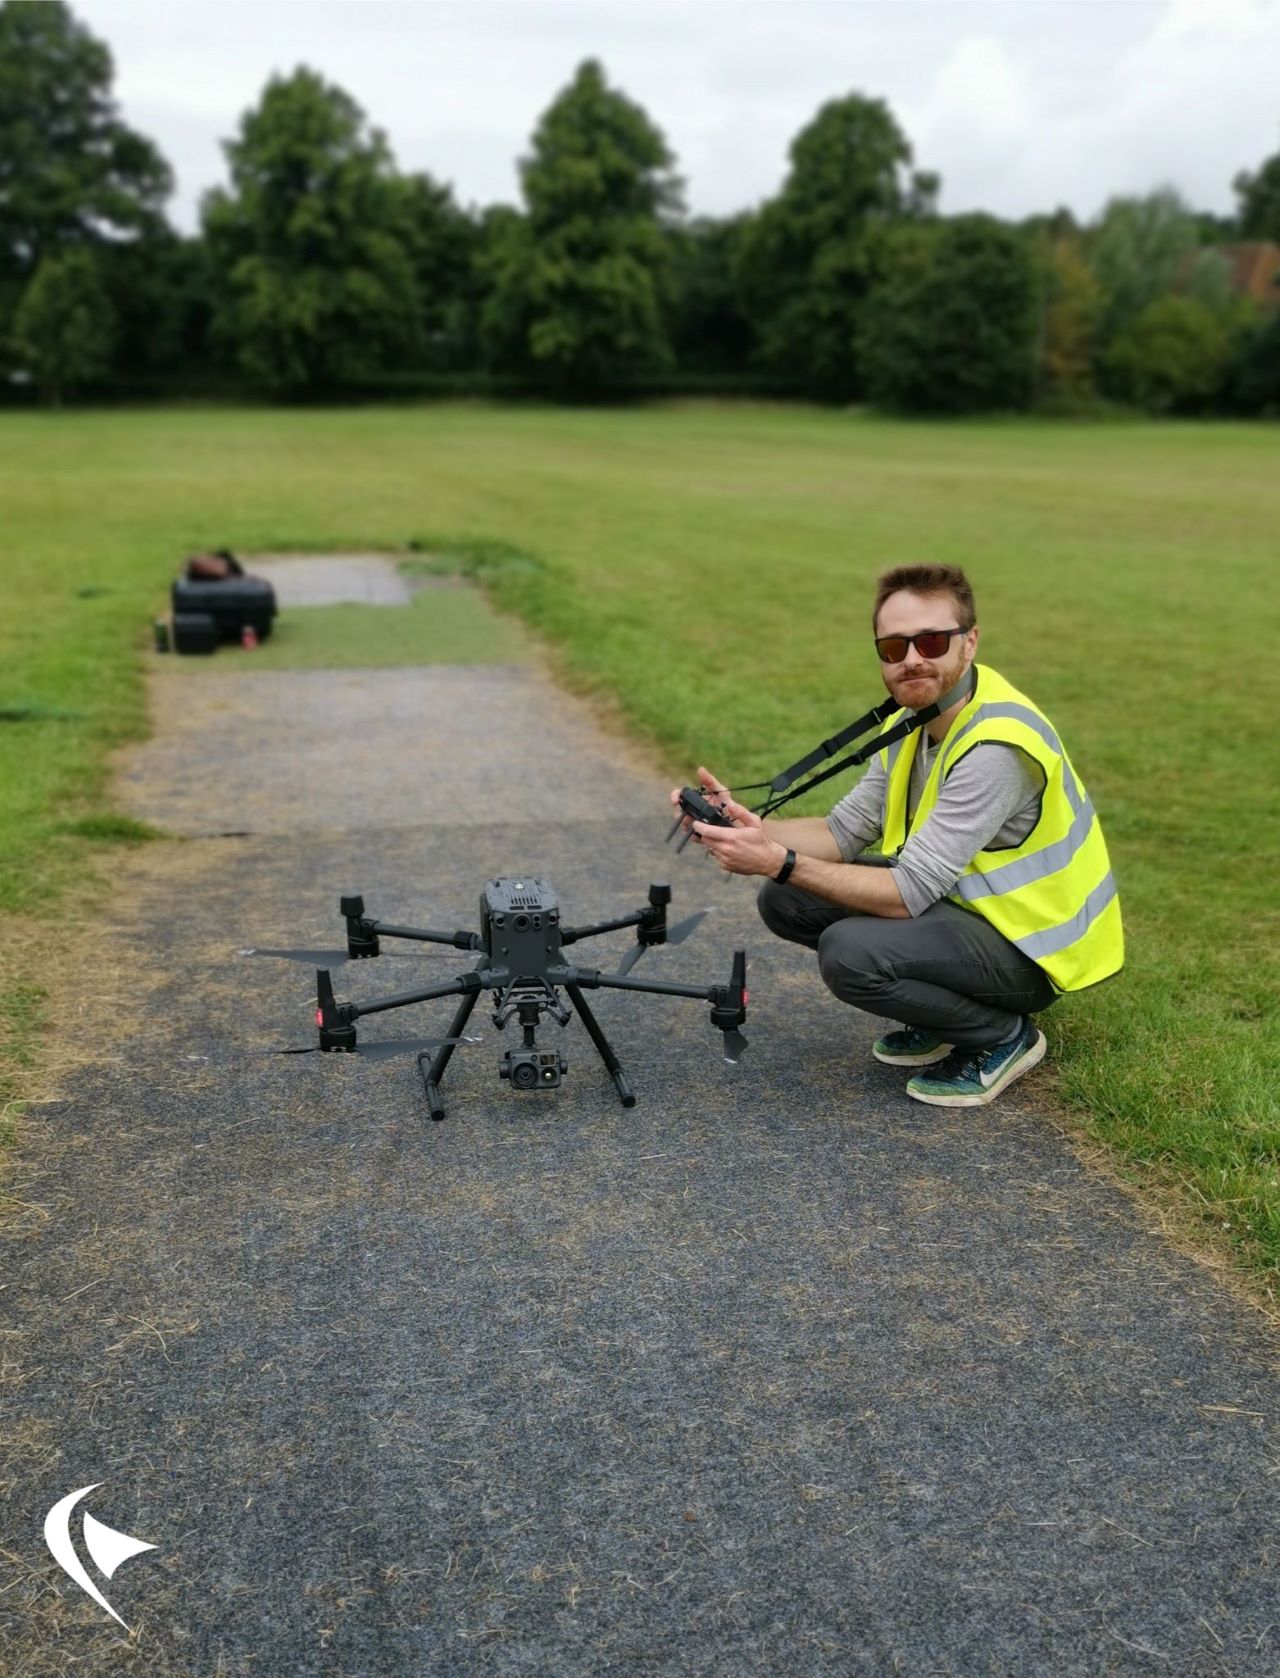 This is an image of Greg with a drone.